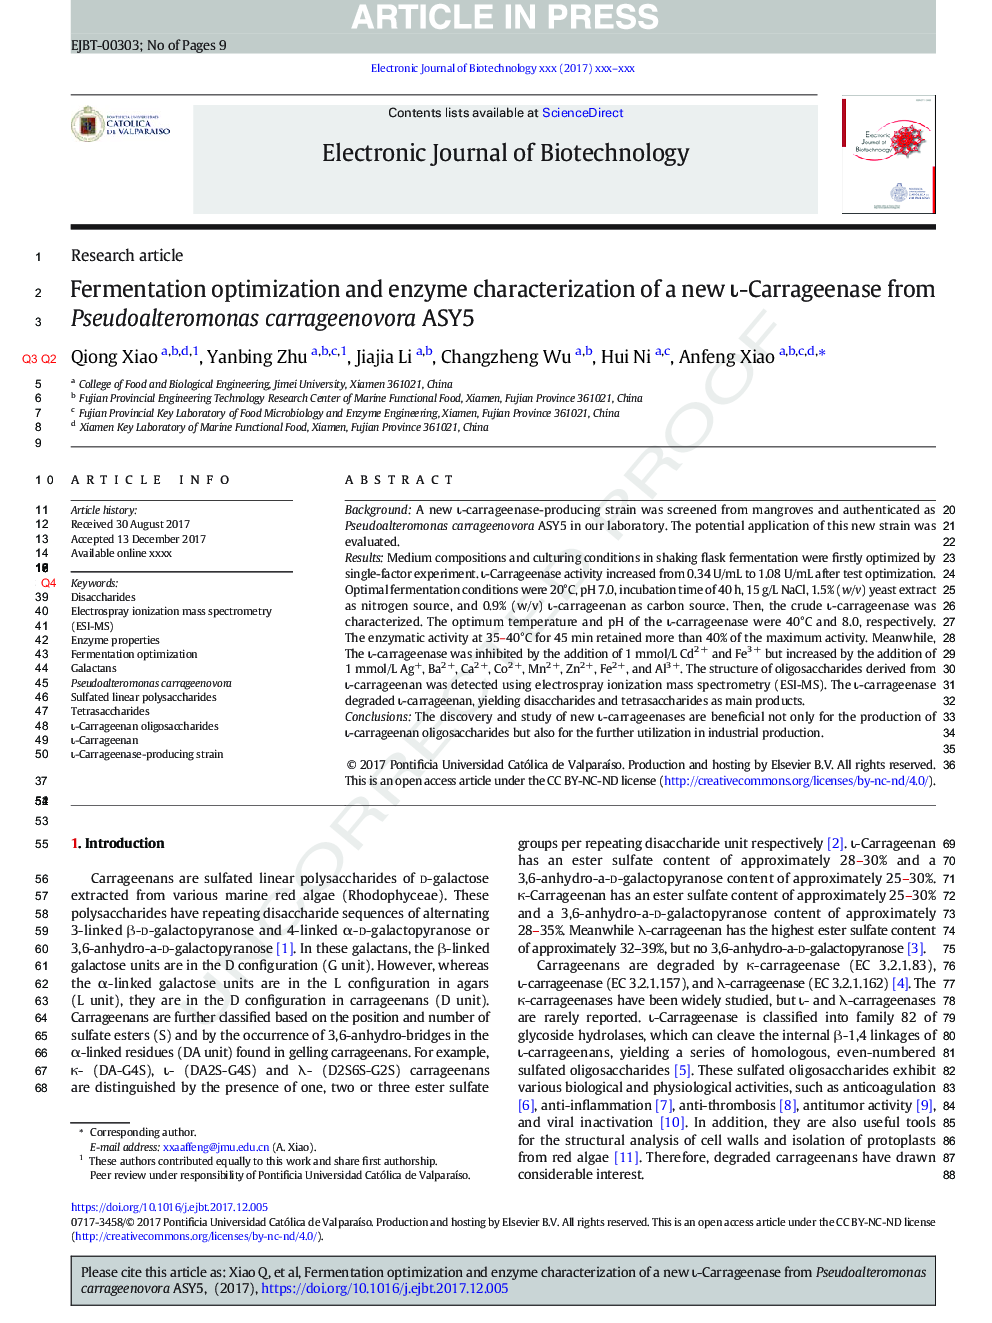 Fermentation optimization and enzyme characterization of a new Î¹-Carrageenase from Pseudoalteromonas carrageenovora ASY5